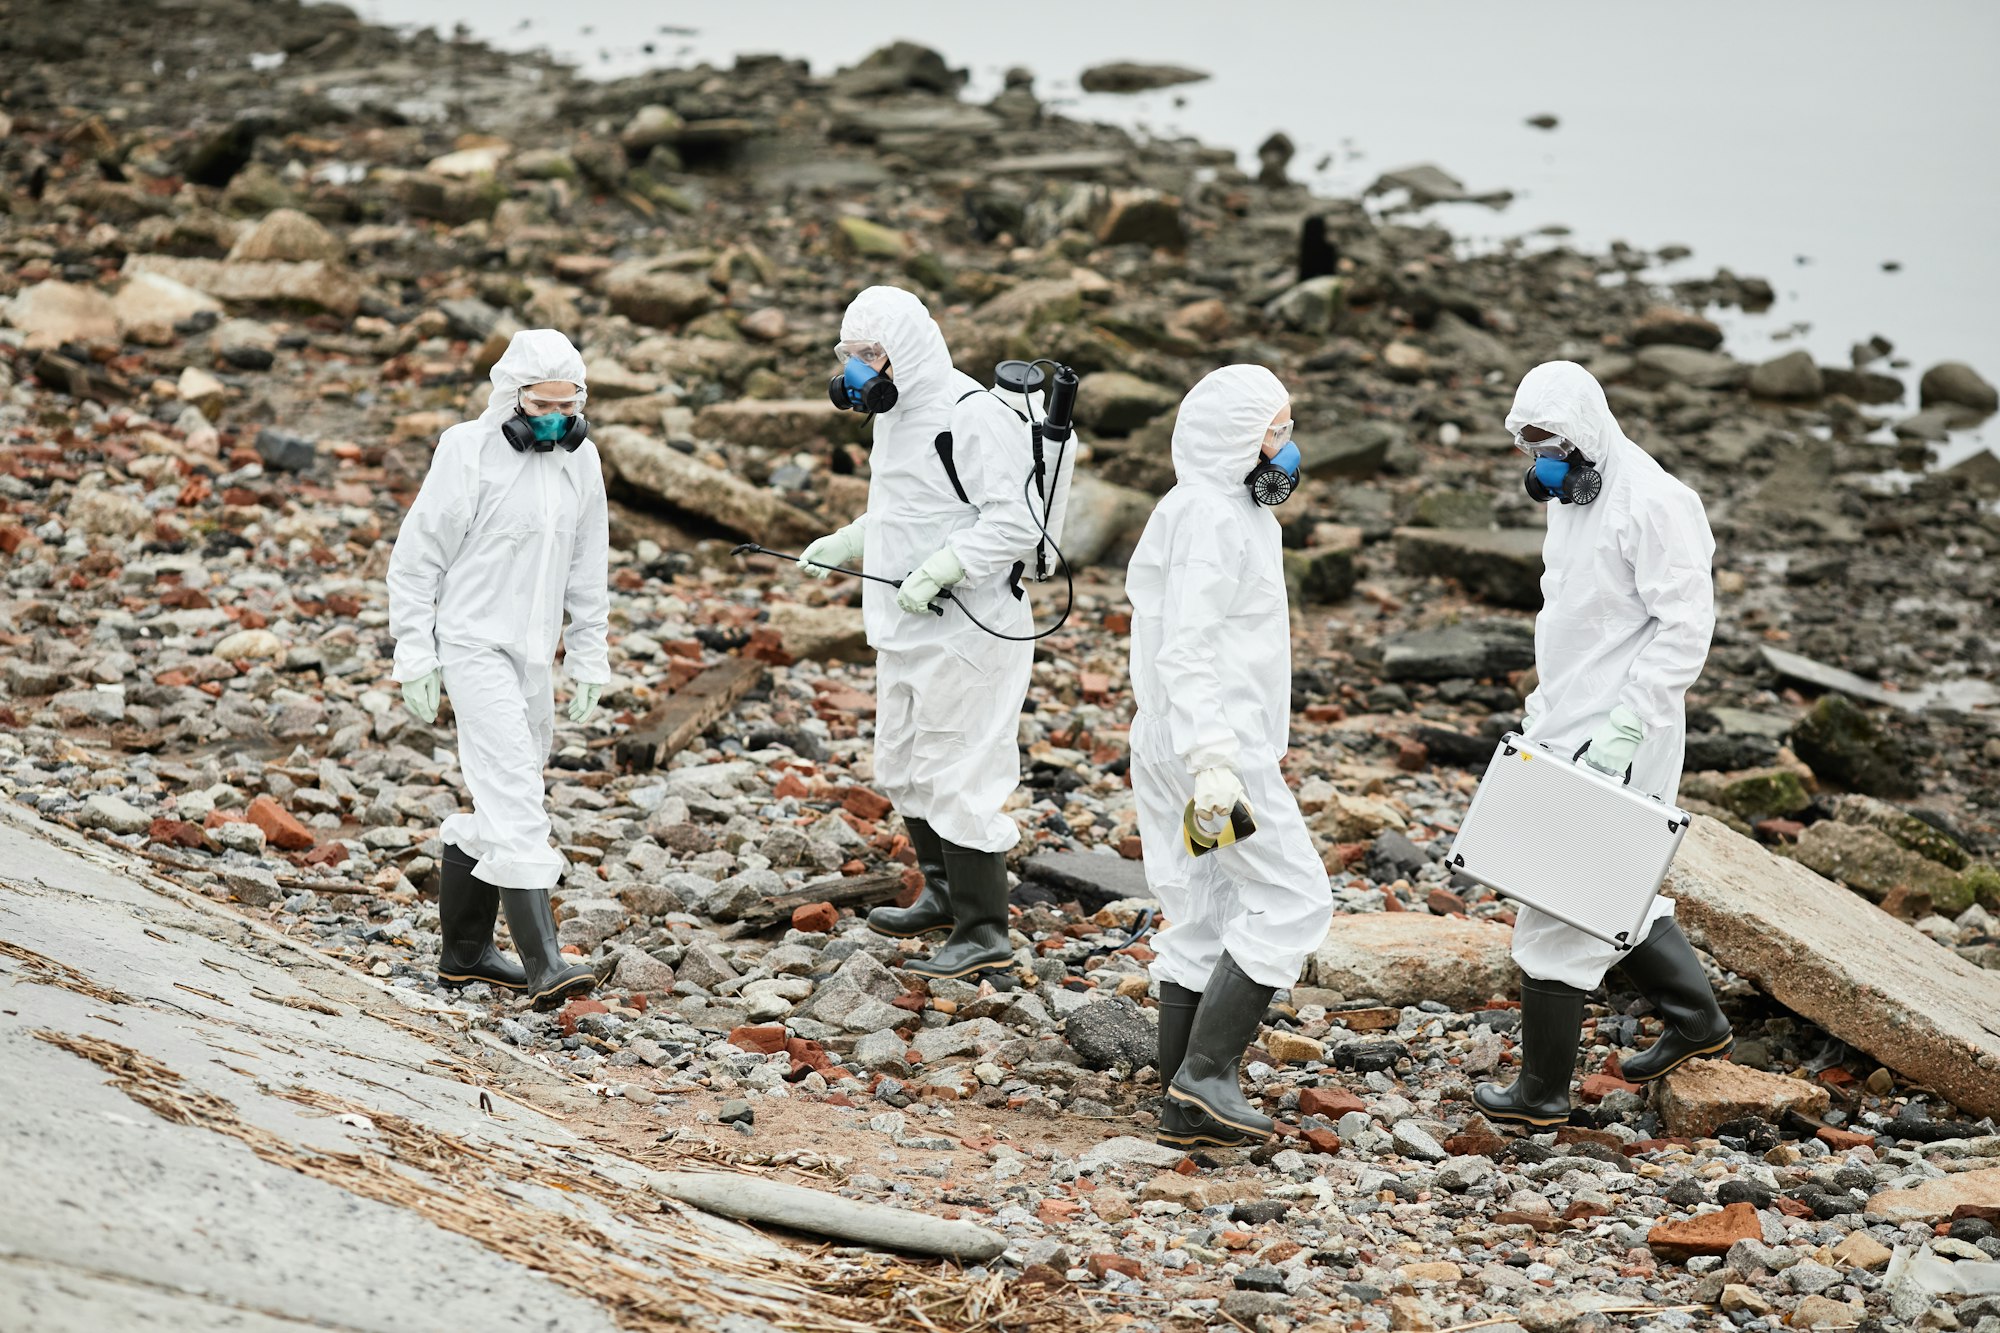 asbestos removal sydney, Group of Workers in Hazmat Suits at Eco Disaster Site